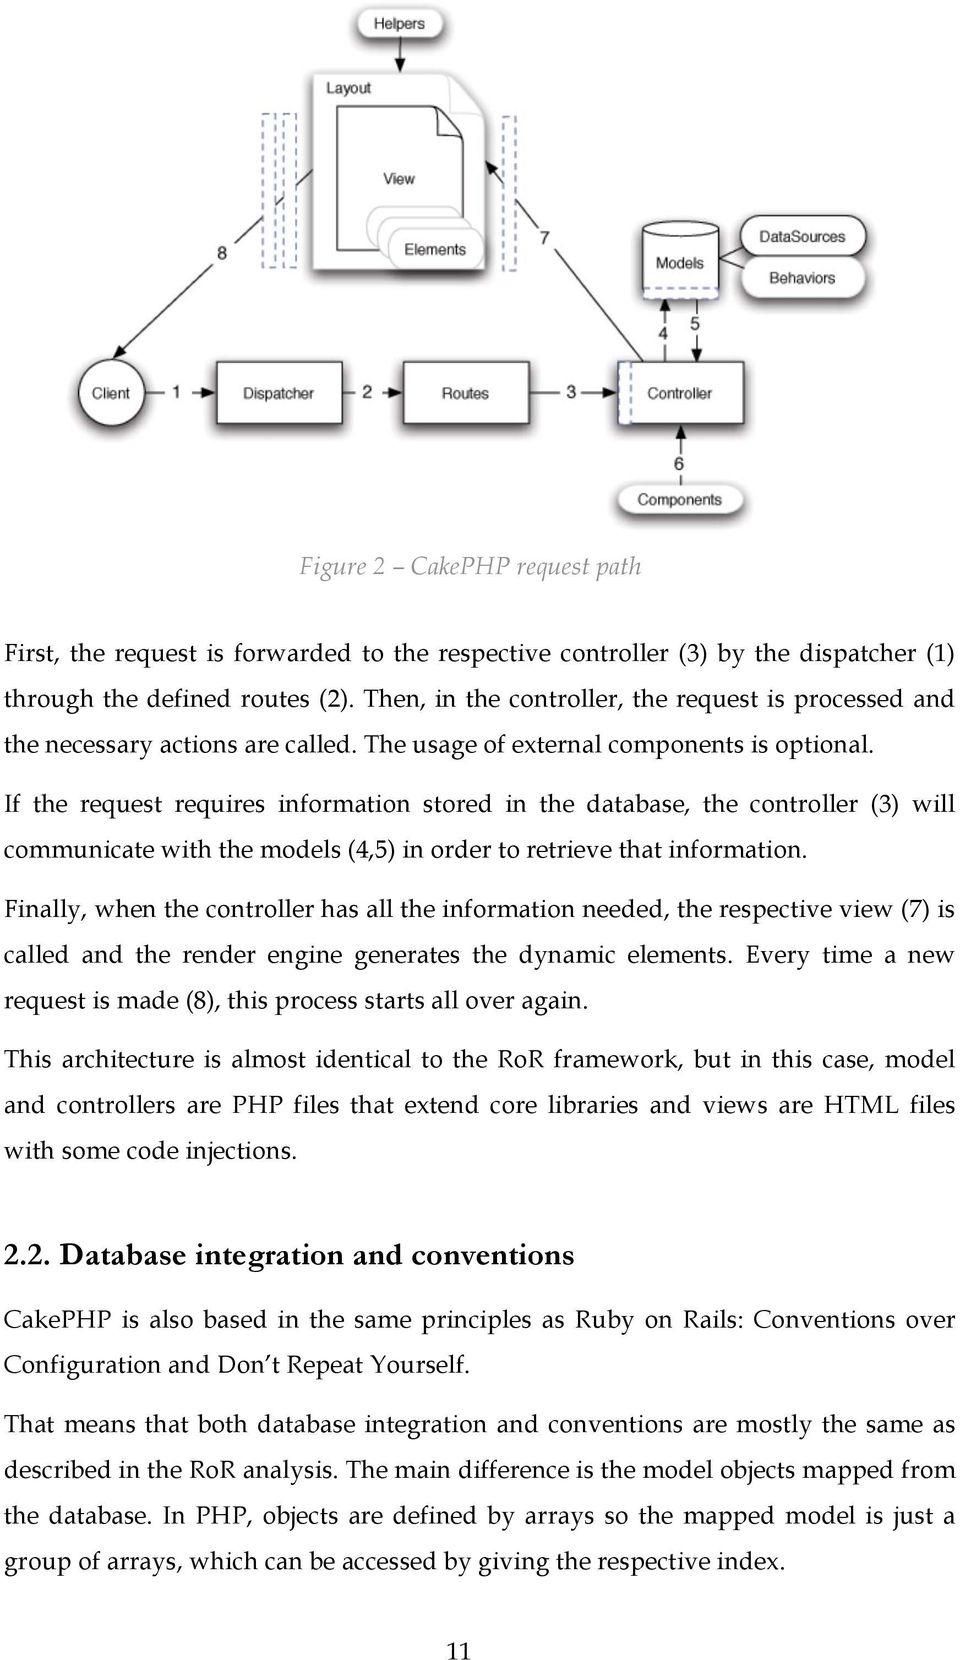 If the request requires information stored in the database, the controller (3) will communicate with the models (4,5) in order to retrieve that information.